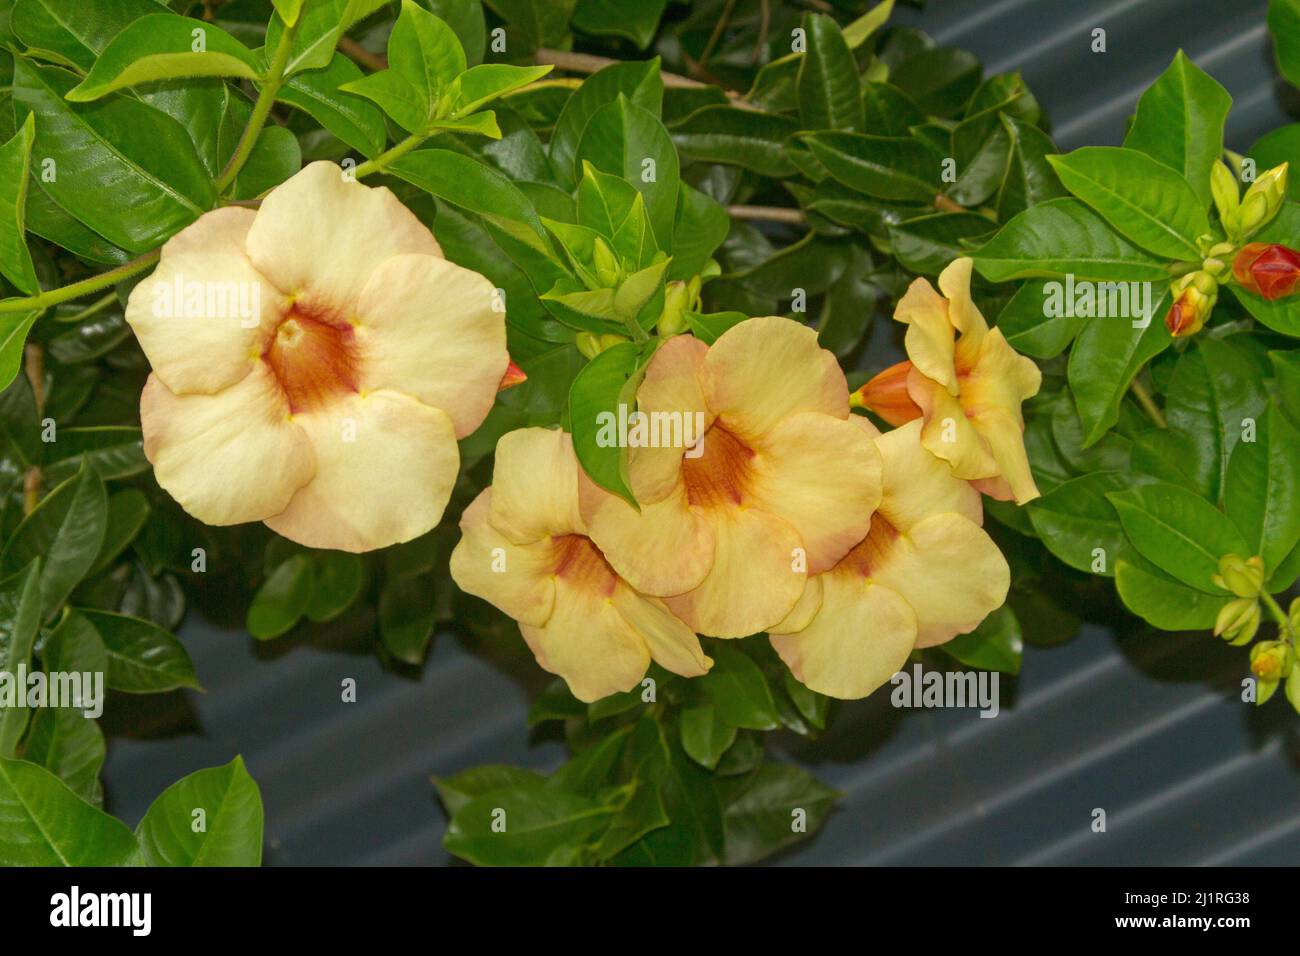 Cluster of beautiful apricot yellow flowers and bright green leaves of unusual climbing plant Allamanda cathartica 'Jamaican Sunset' Stock Photo